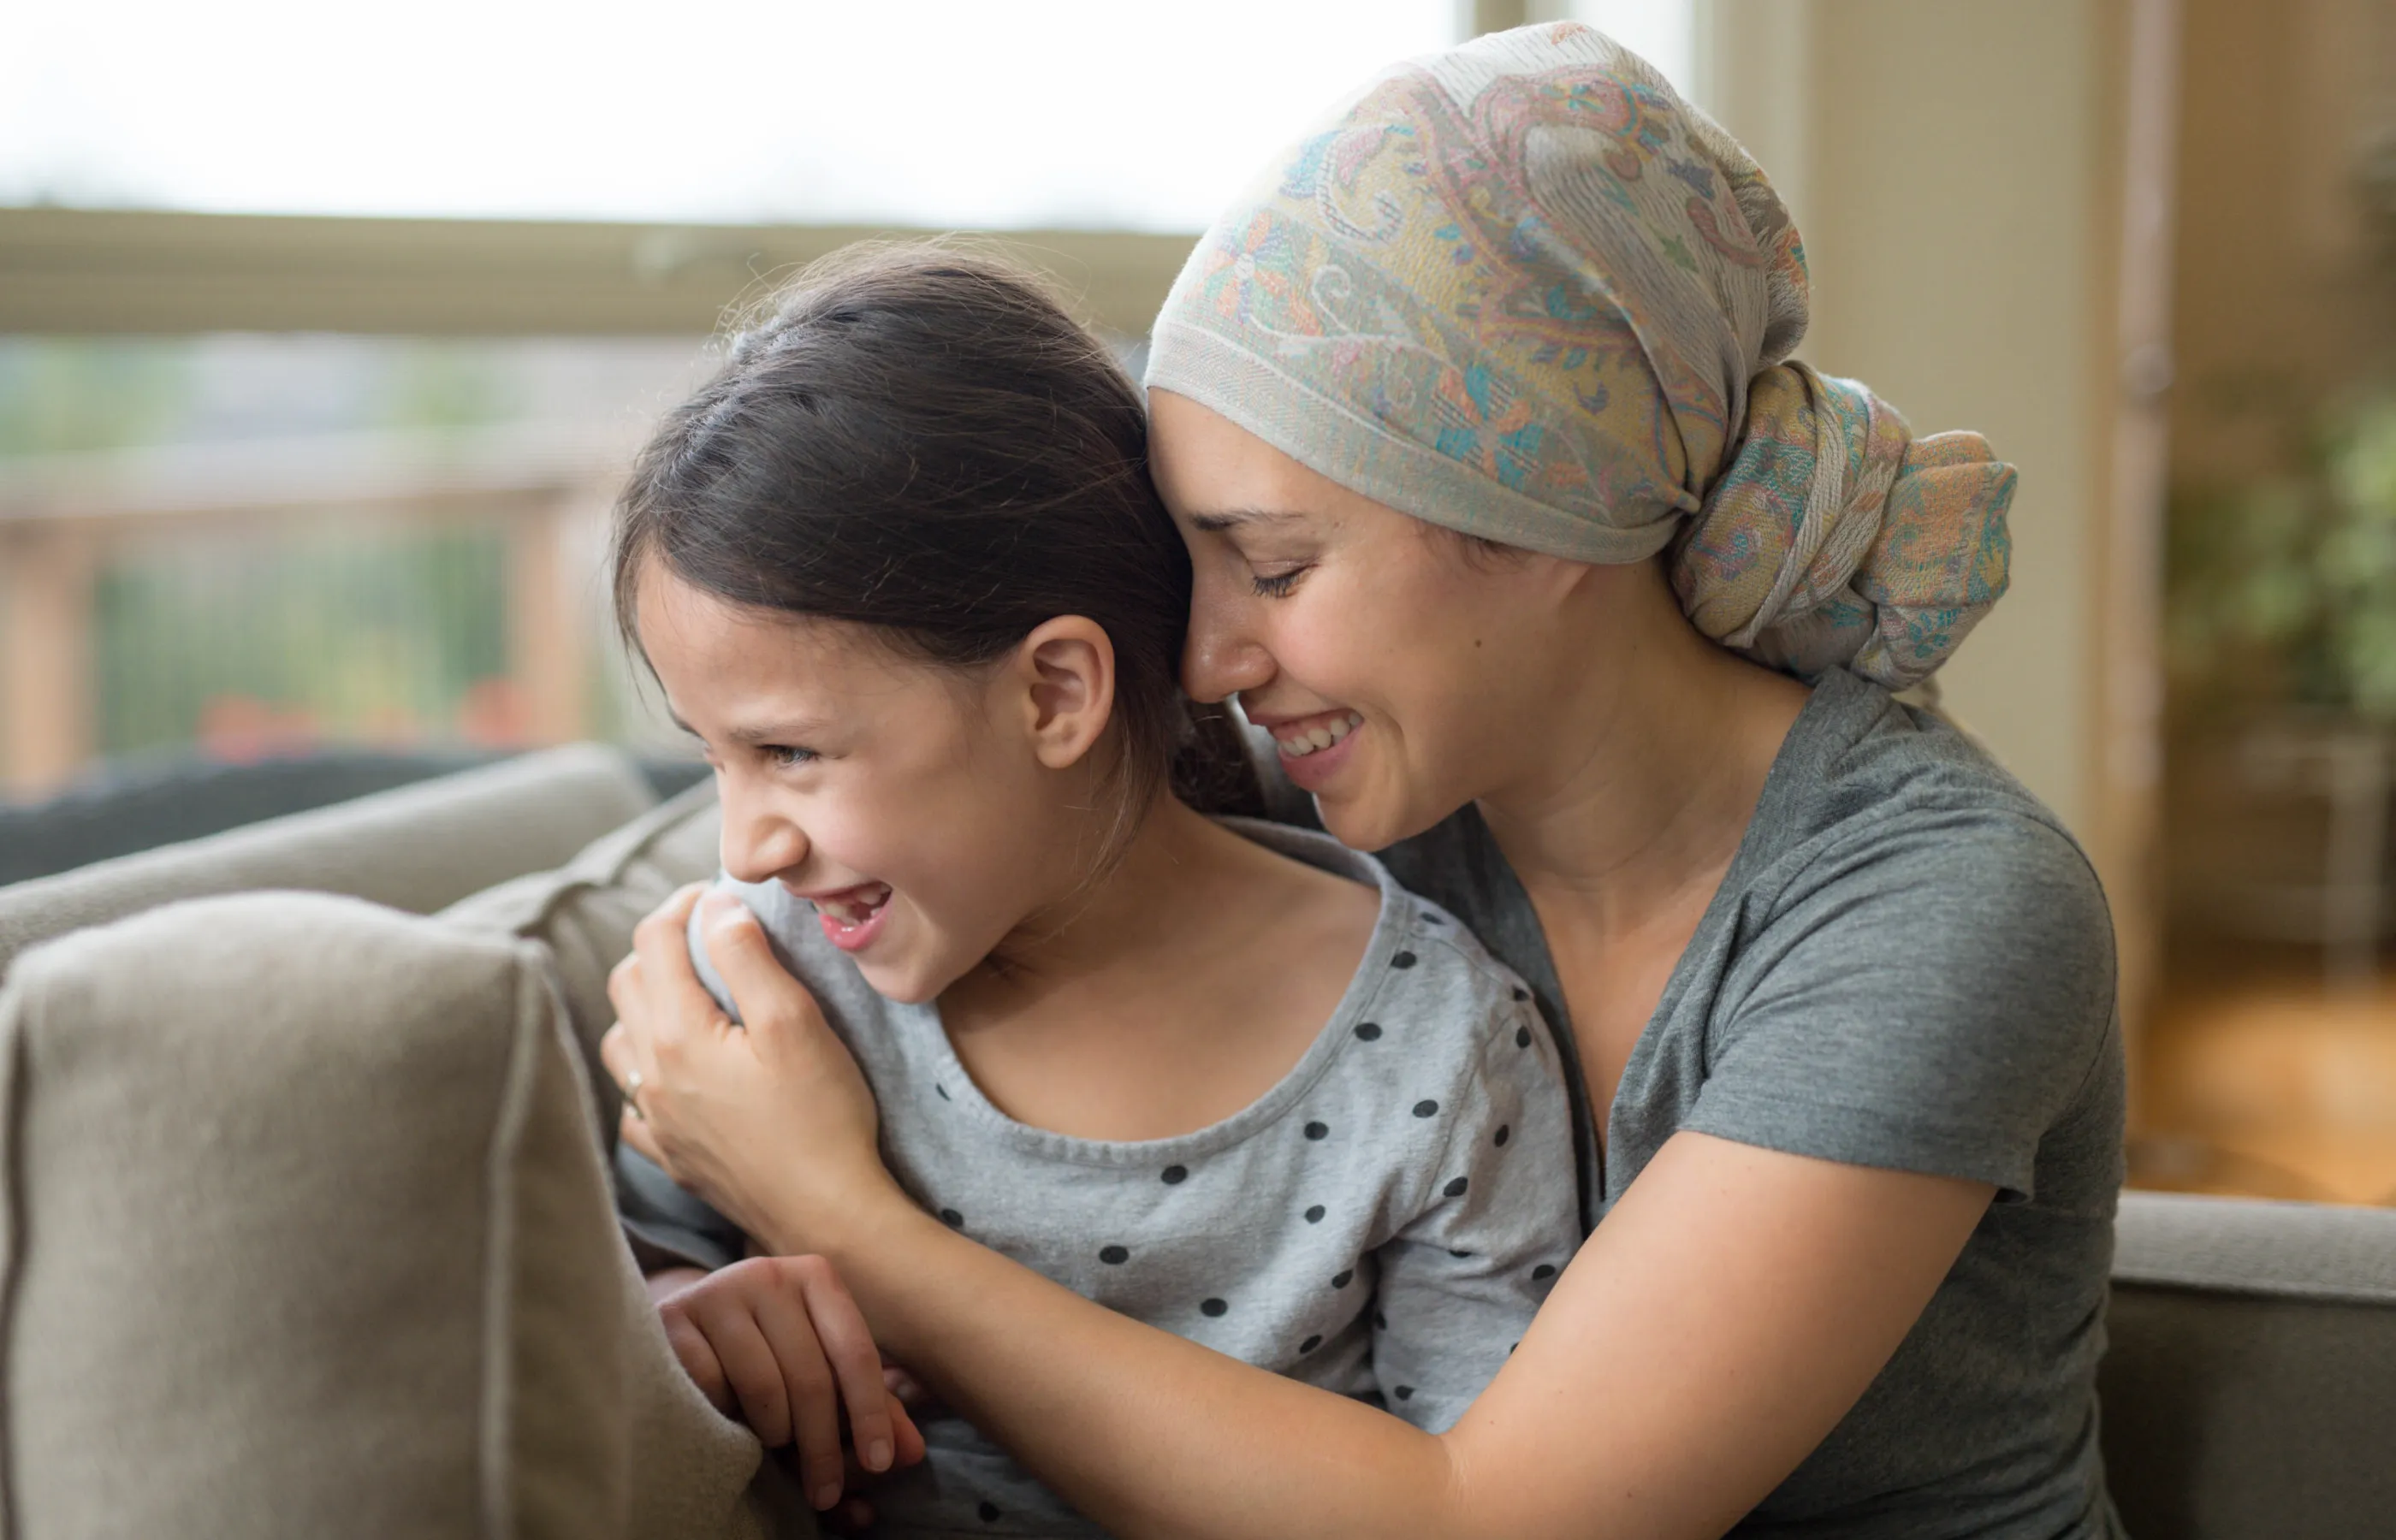 A mother, who is a cancer patient, is hugging her young daughter as they both look out the window of their home.